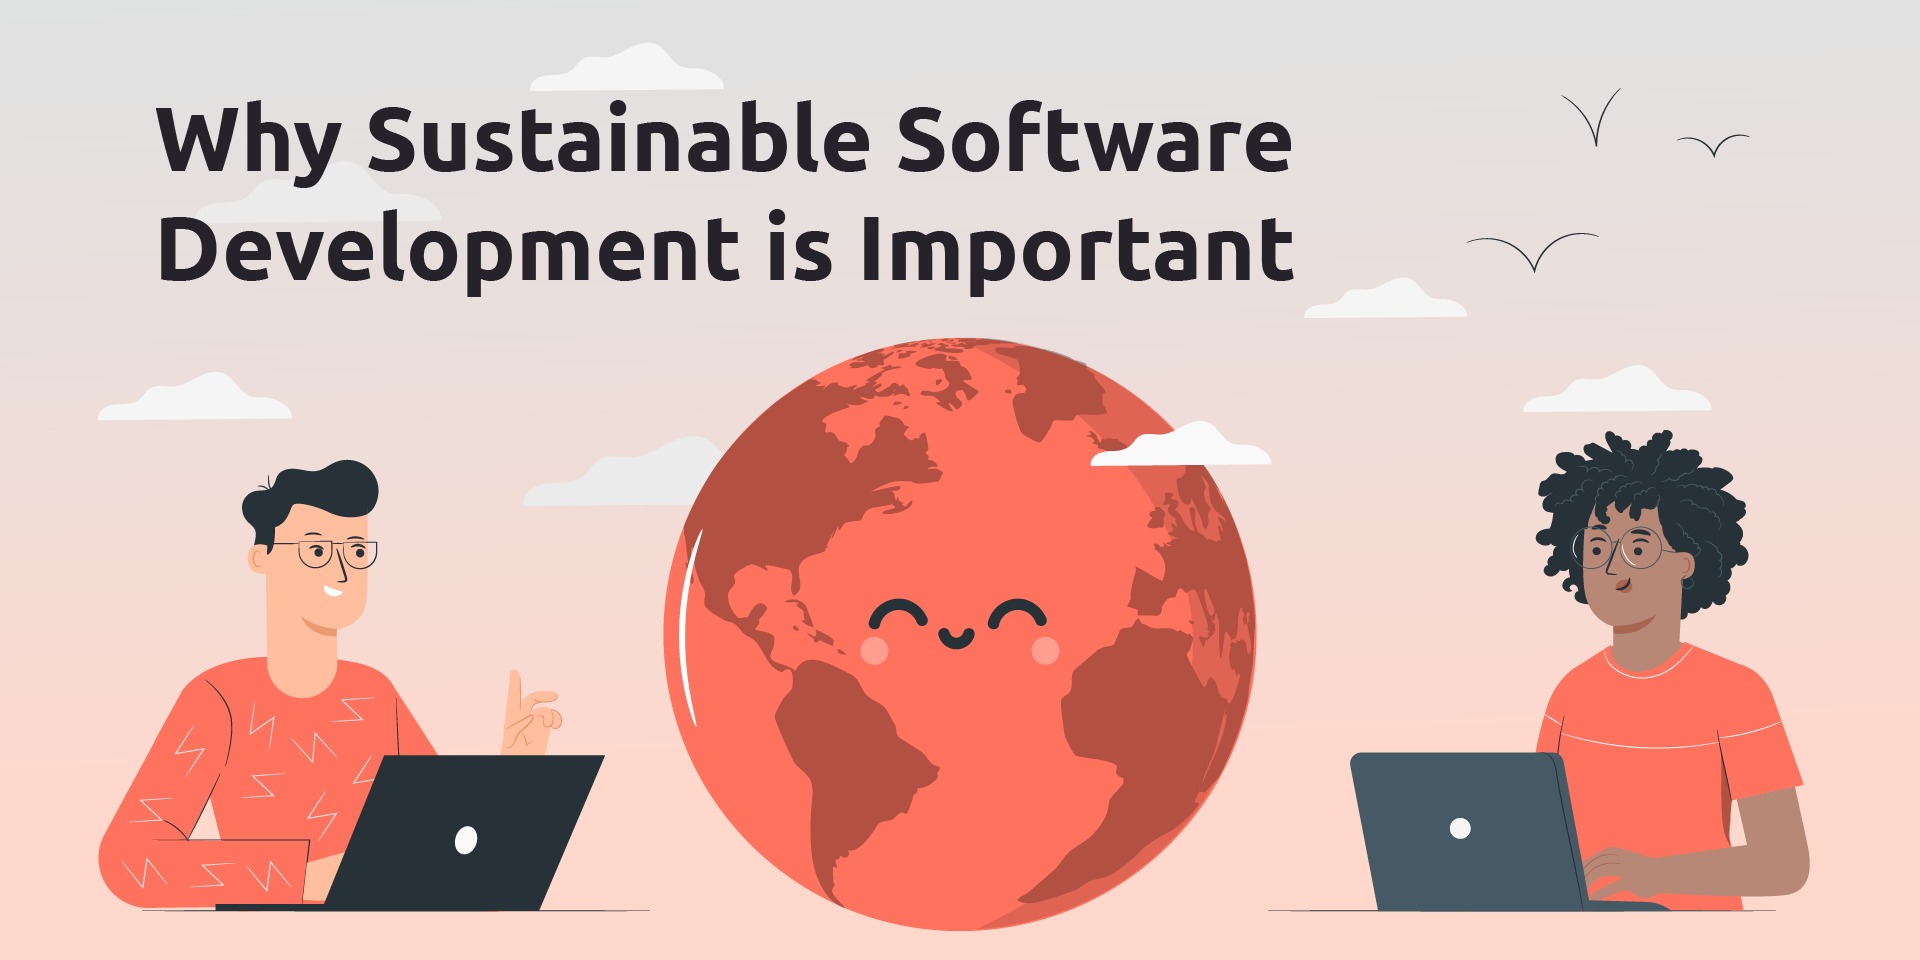 Why Sustainability in Software Development is Important